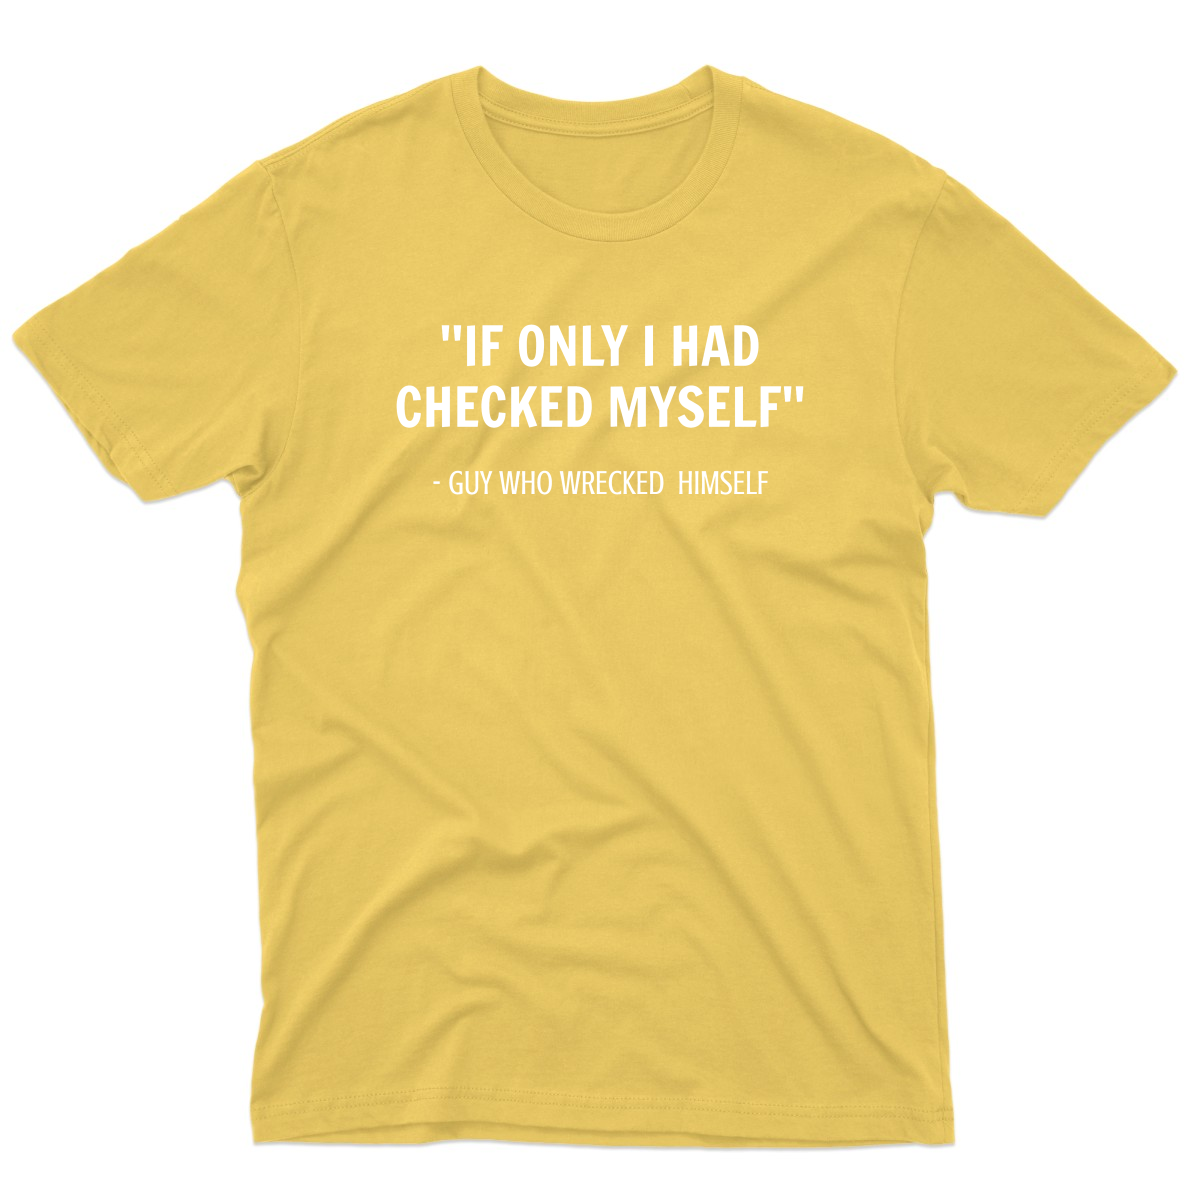 If I only had checked myself Men's T-shirt | Yellow